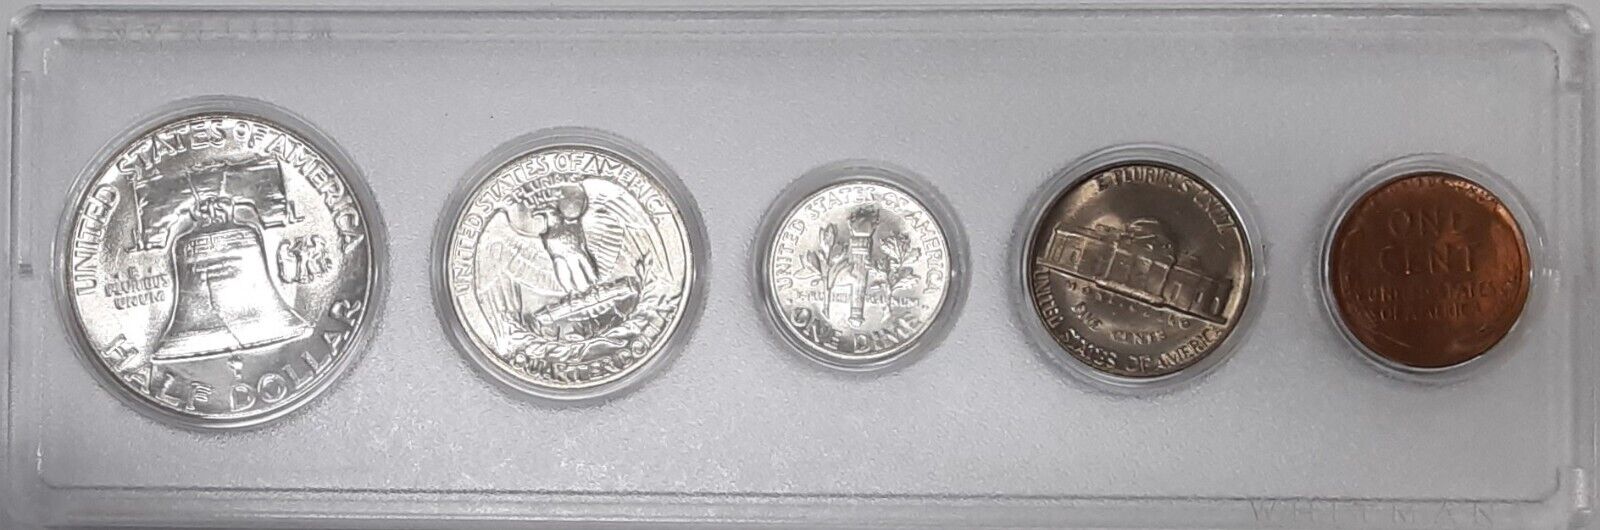 1953 P,D,S Year Set w/Silver Half, Quarter & Dime 15 Coins in Whitman Holders